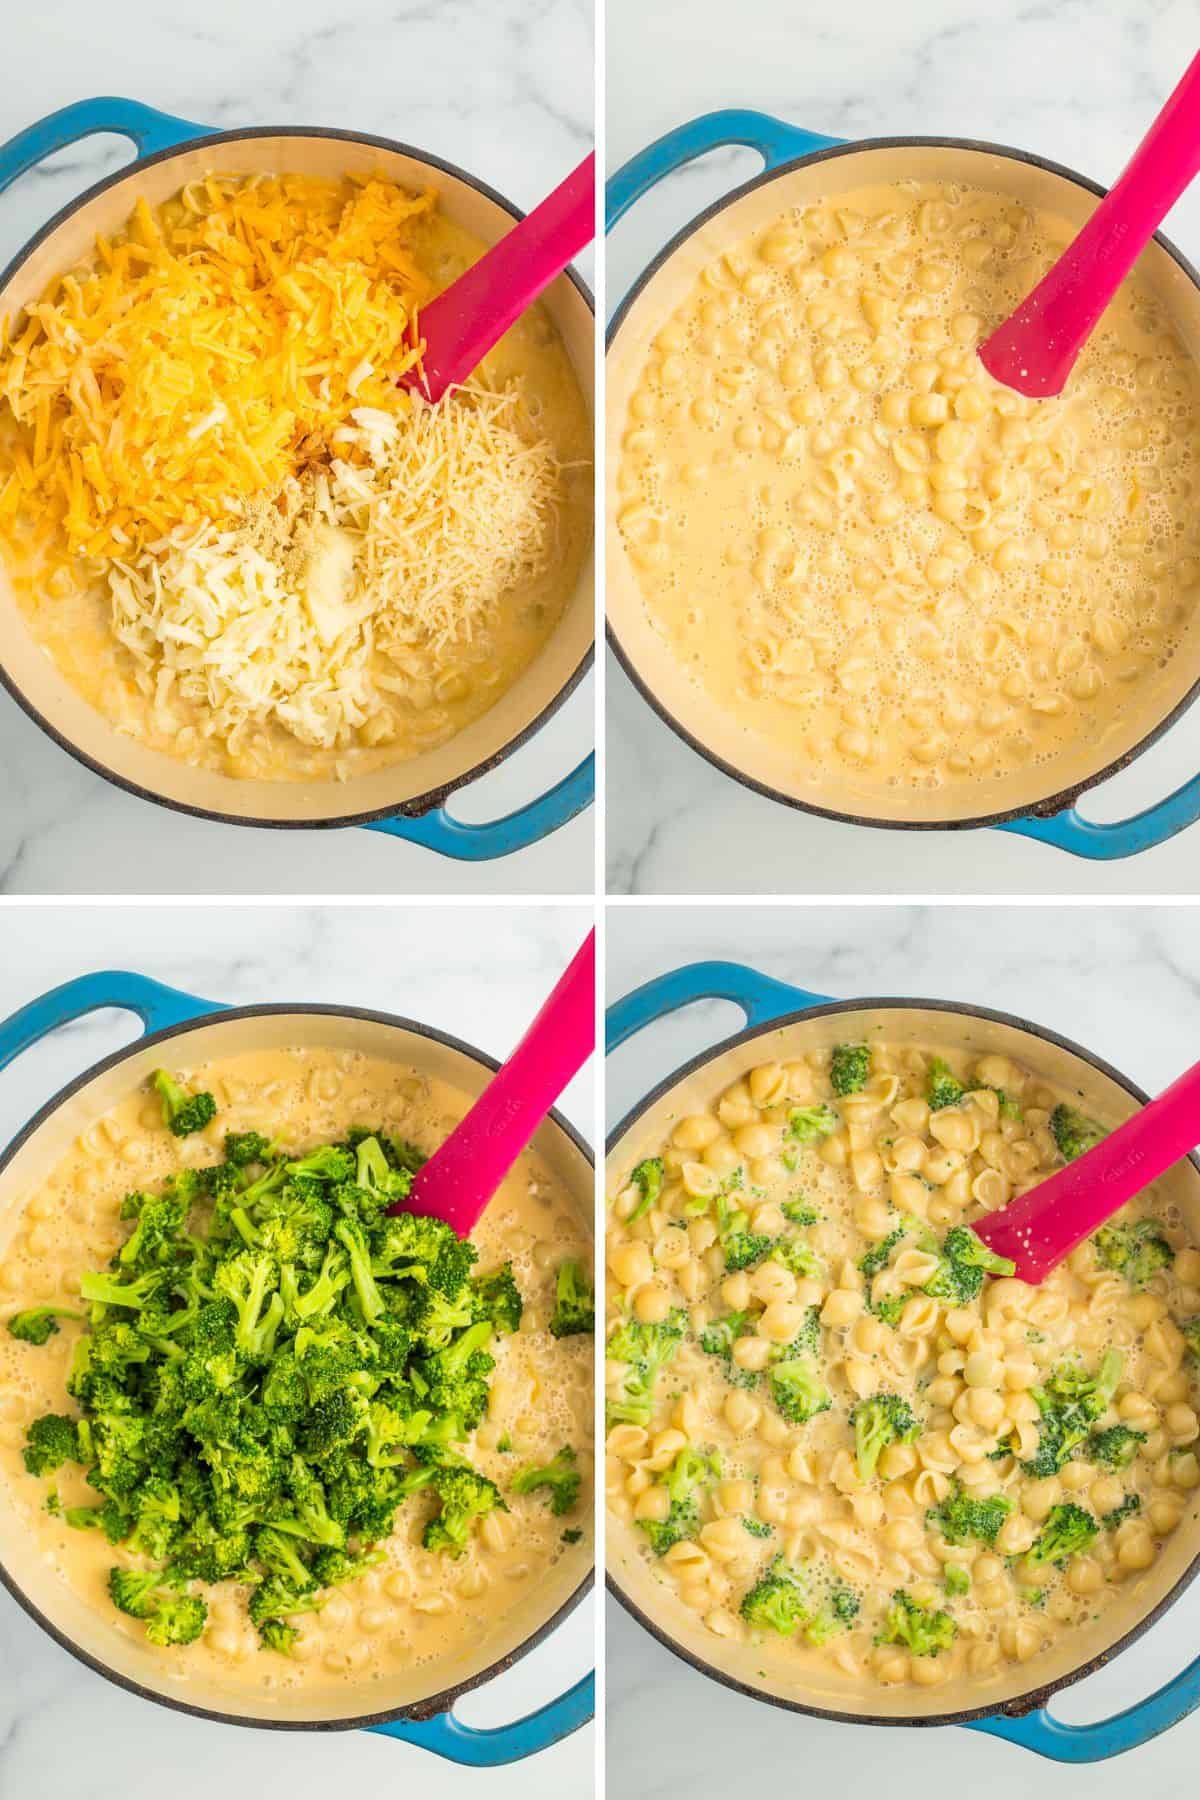 4 photos showing how to make stovetop macaroni and cheese.